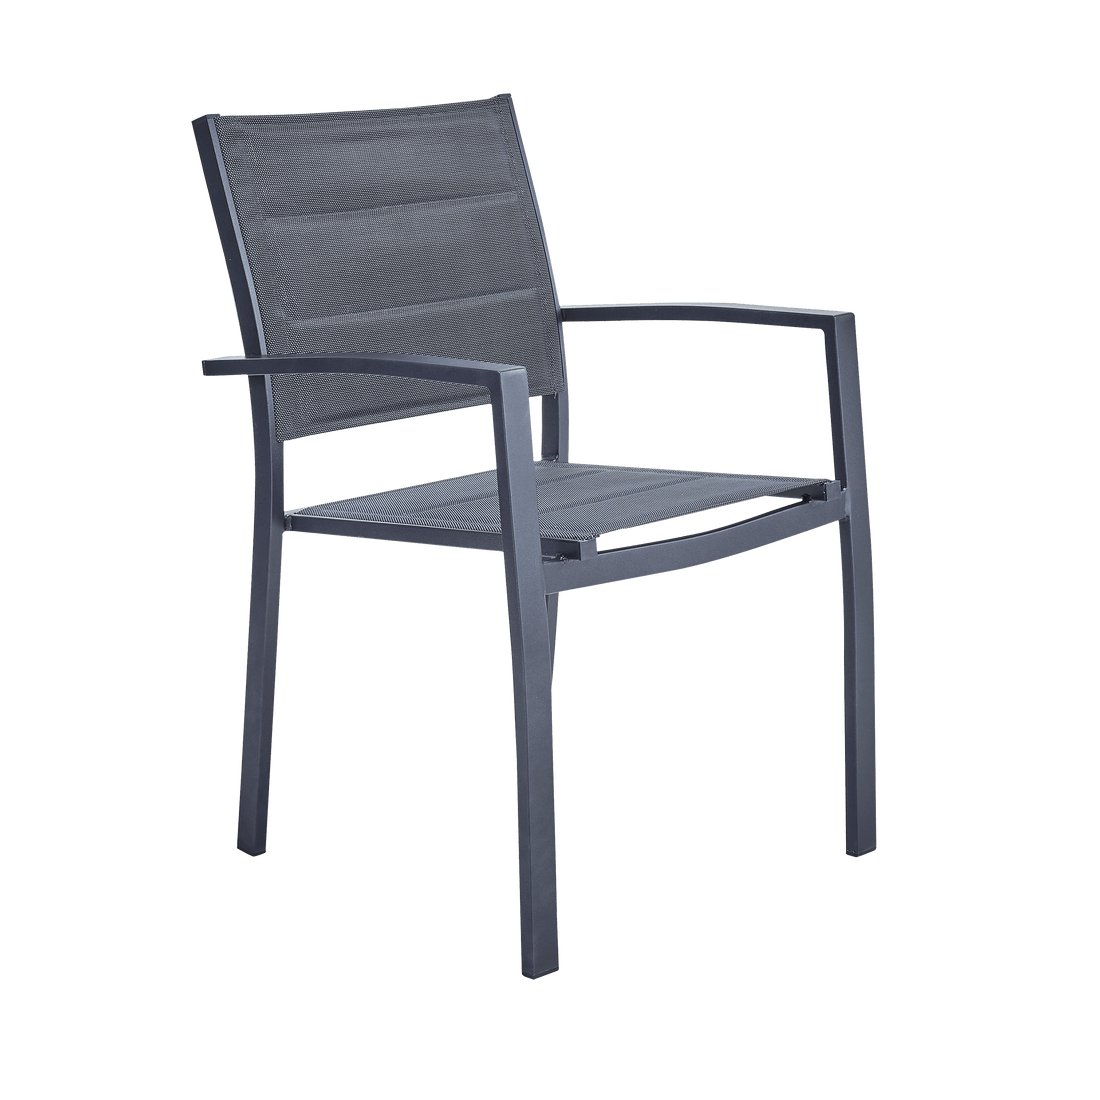 ORION BETA II NATERIAL Chair with armrests aluminum and textilene, padded, anthracite - best price from Maltashopper.com BR500013573